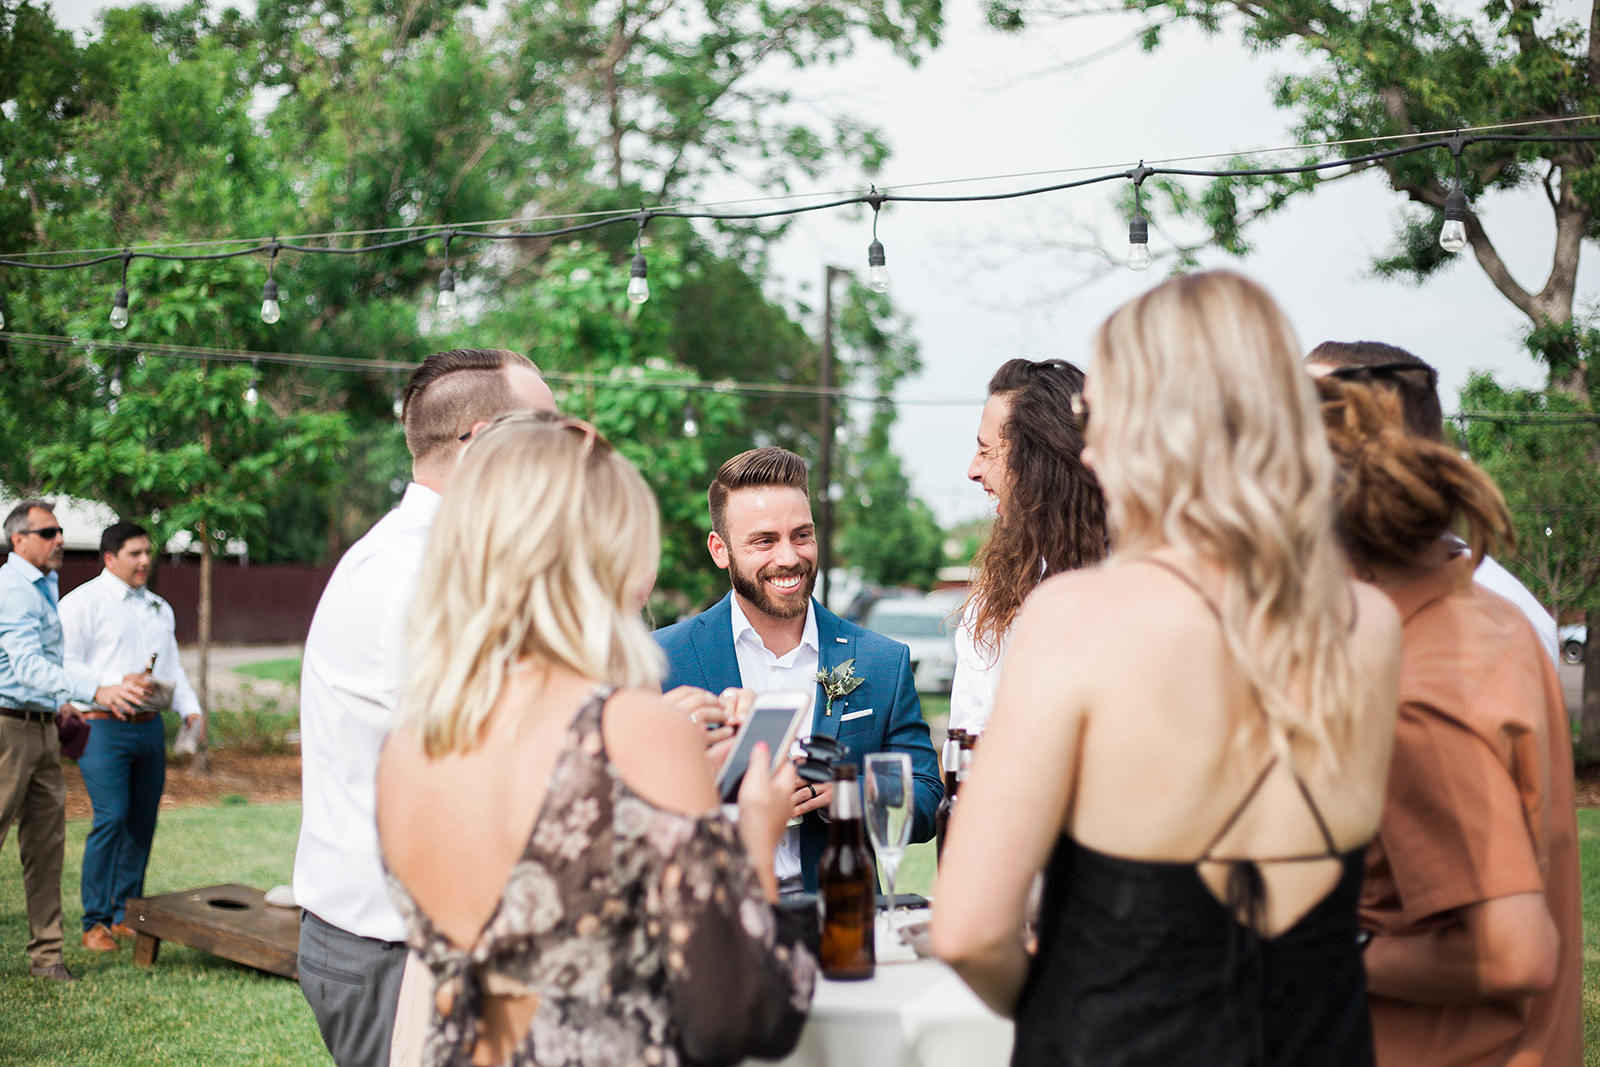 groom laughing with friends at reception cocktail hour